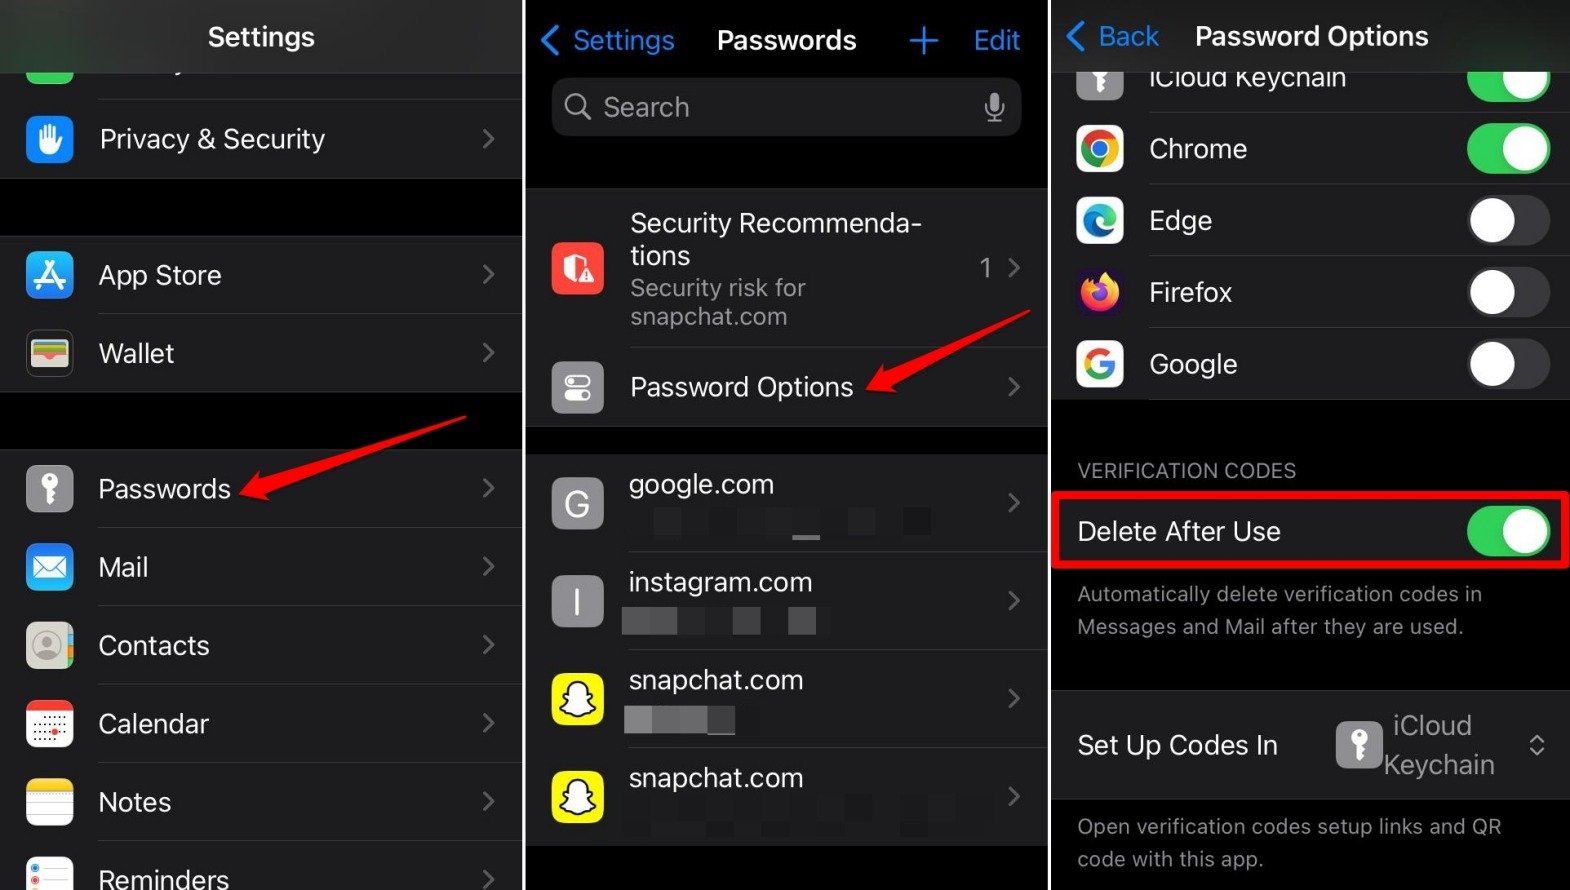 enable-delete-after-use to remove OTPs and verification codes on iPhone